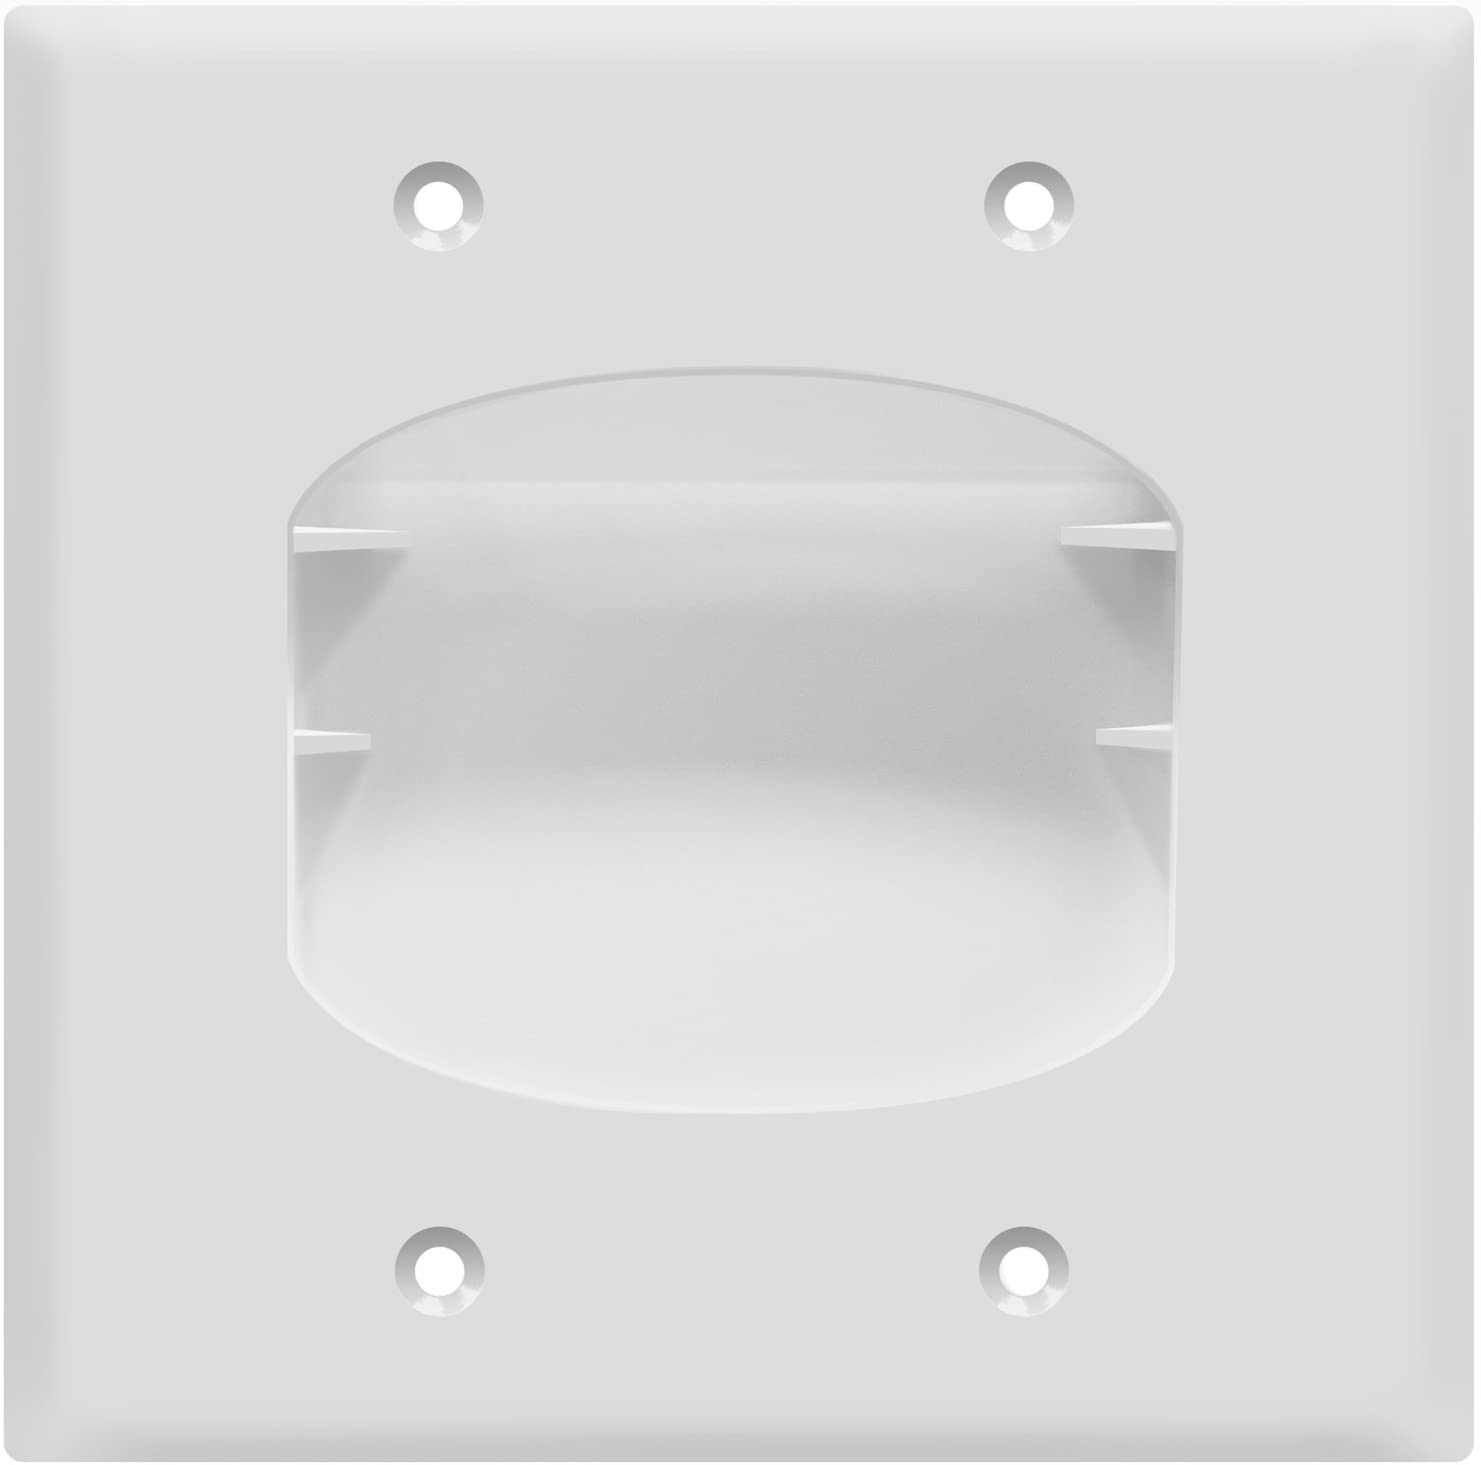 2 x 3-Gang White Recessed Wall Plate Pass Through Low Voltage Audio Video Cable 